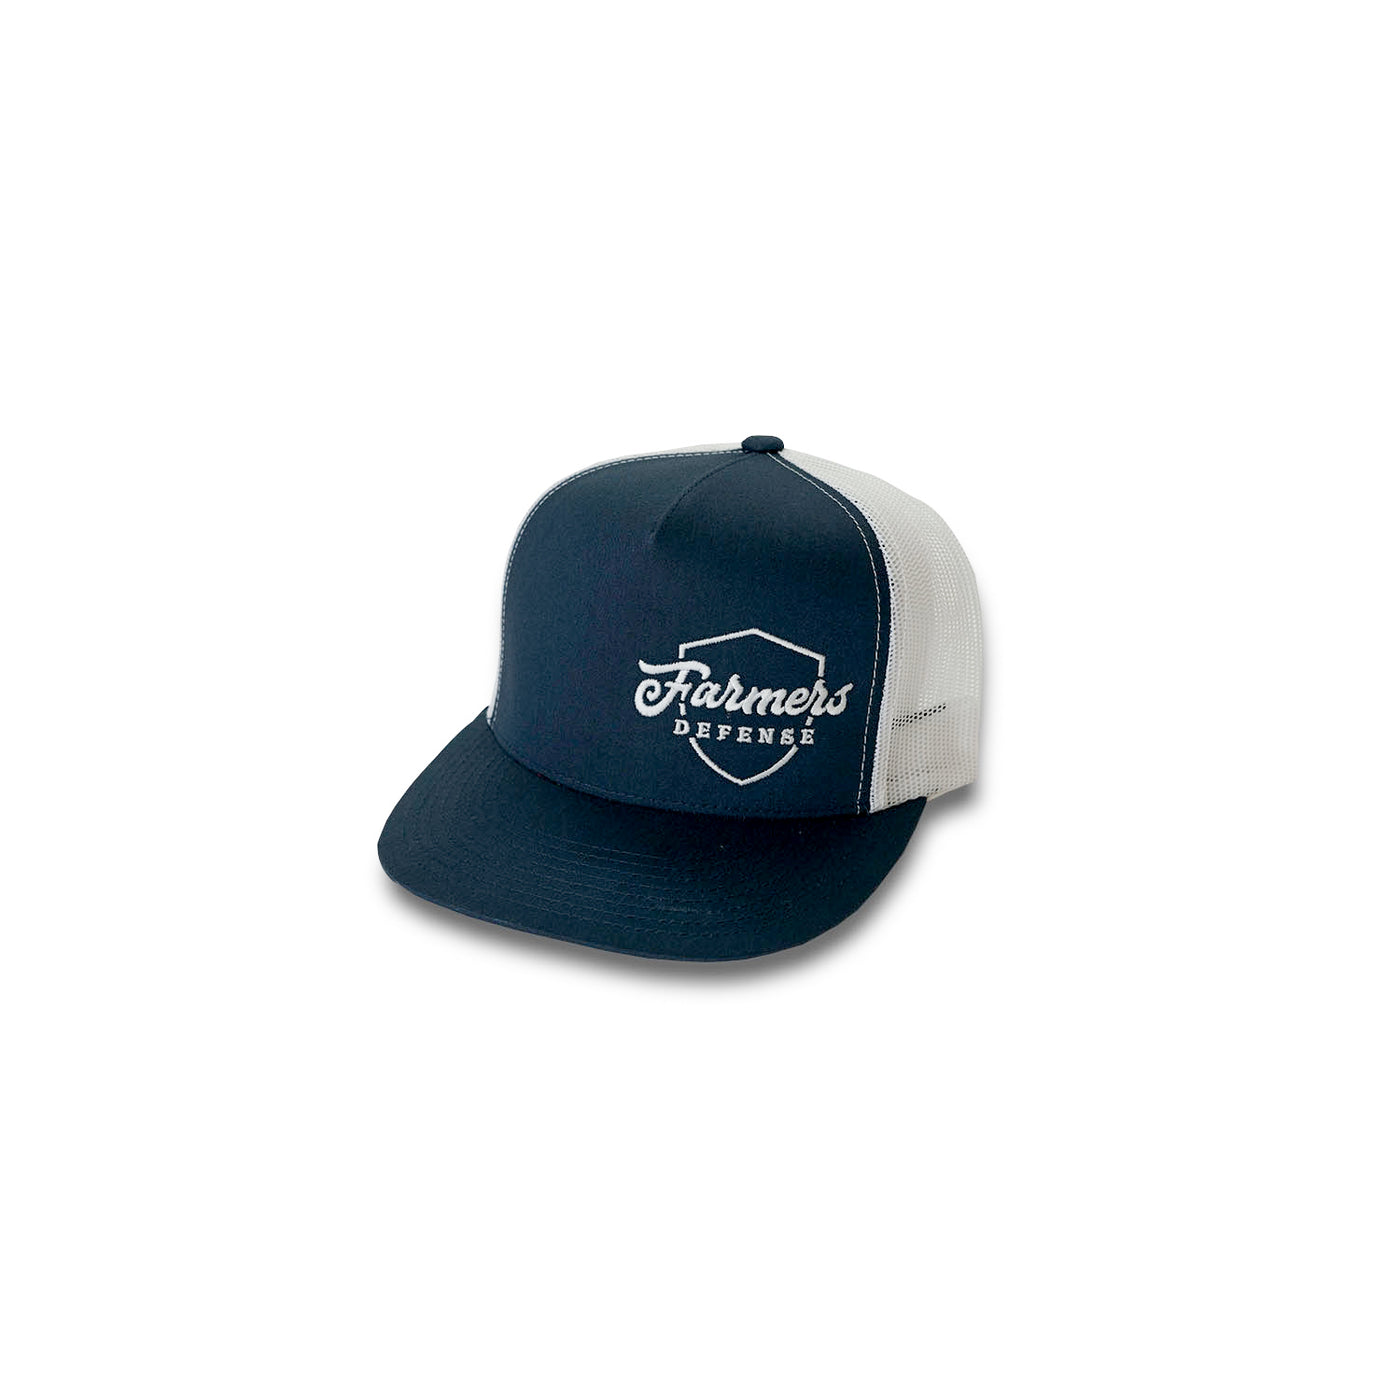 Farmers Defense Trucker Hat -Embroidered Shield Logo Navy on White